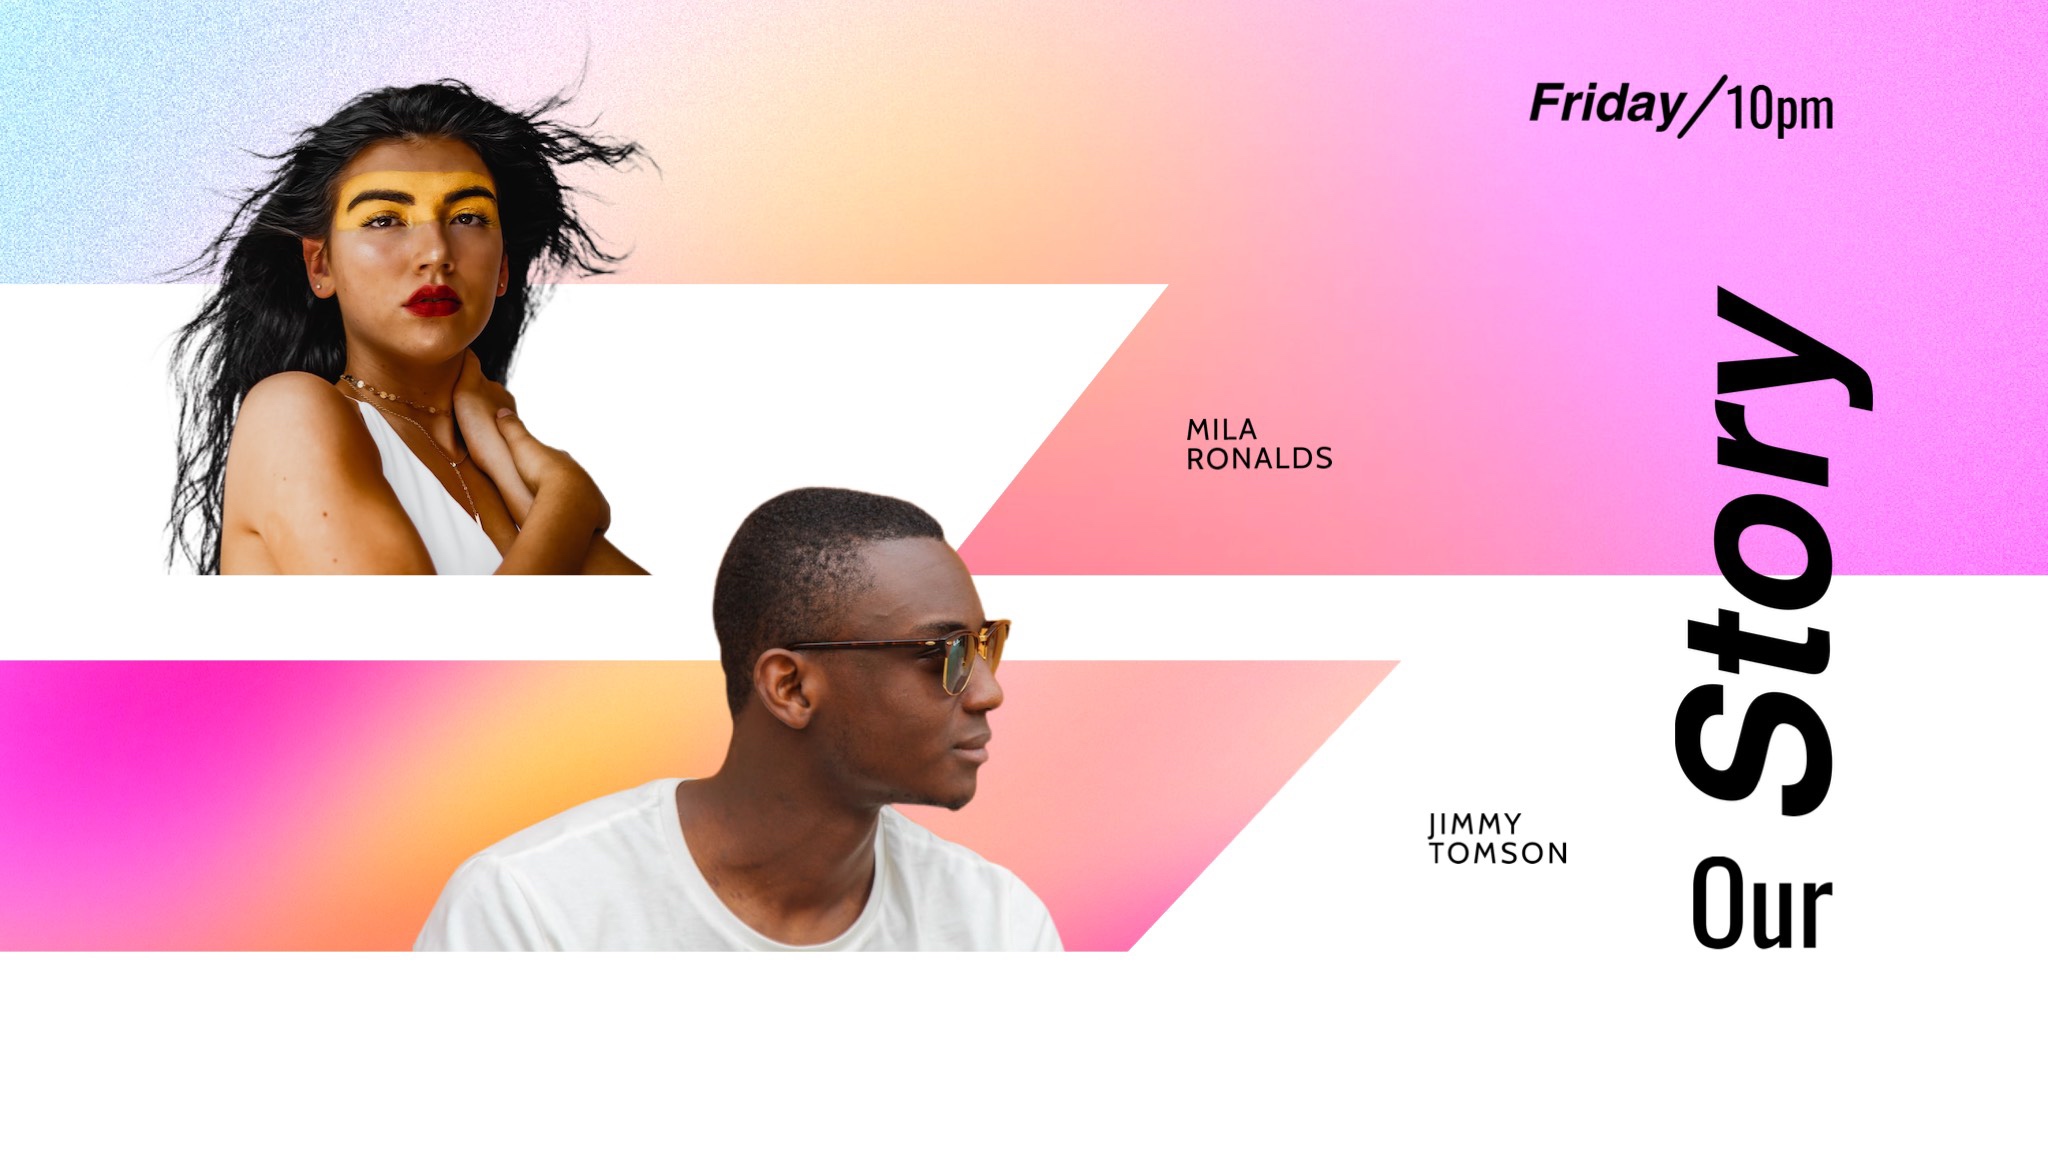 A Poster For A Fashion Show Featuring A Woman And A Man By Chinwe Chukwuogo-Roy Magic Youtube Thumbnail Template